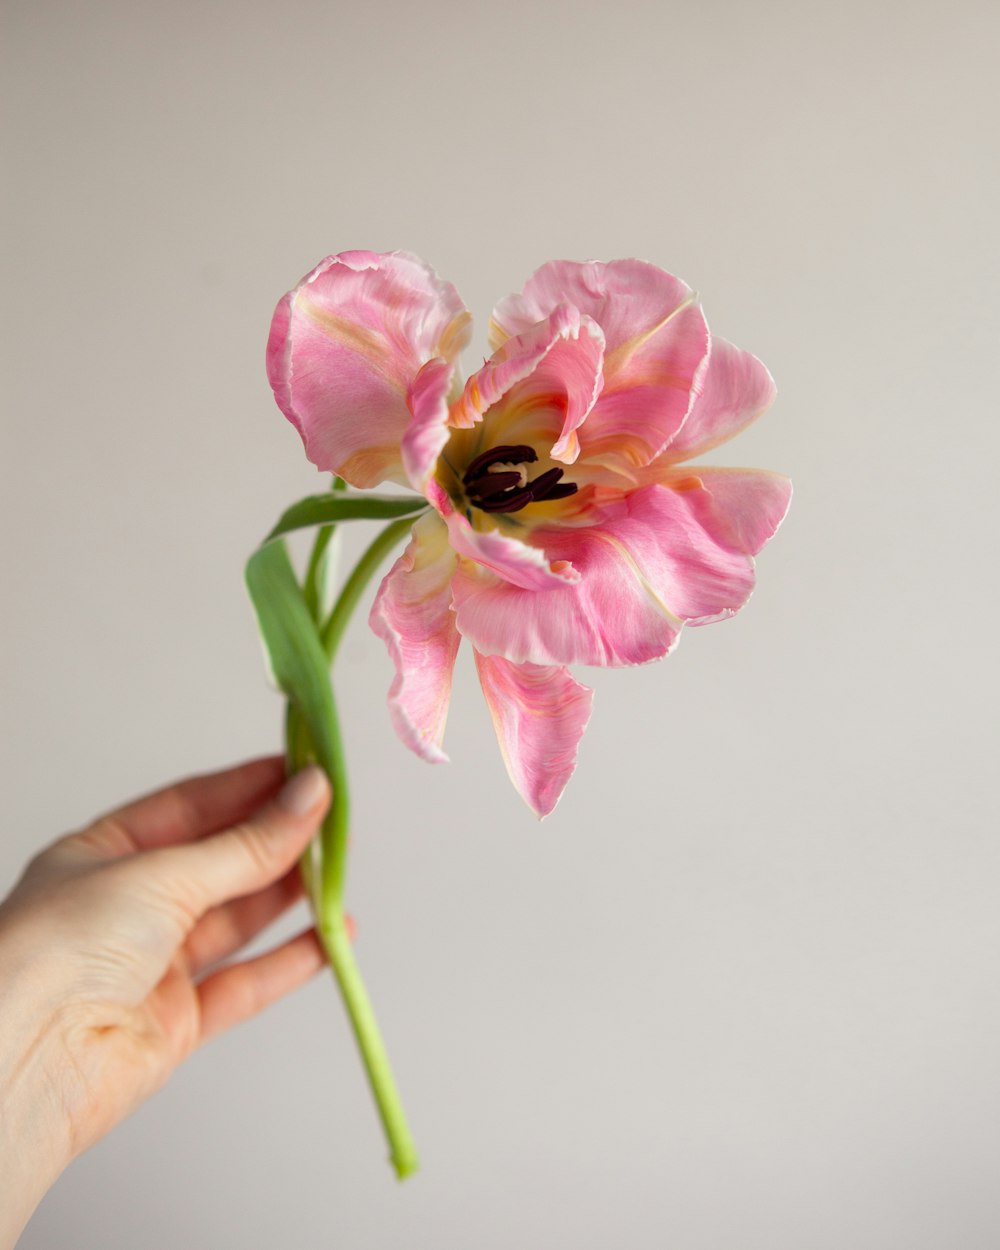 person holding pink flower in close up photography